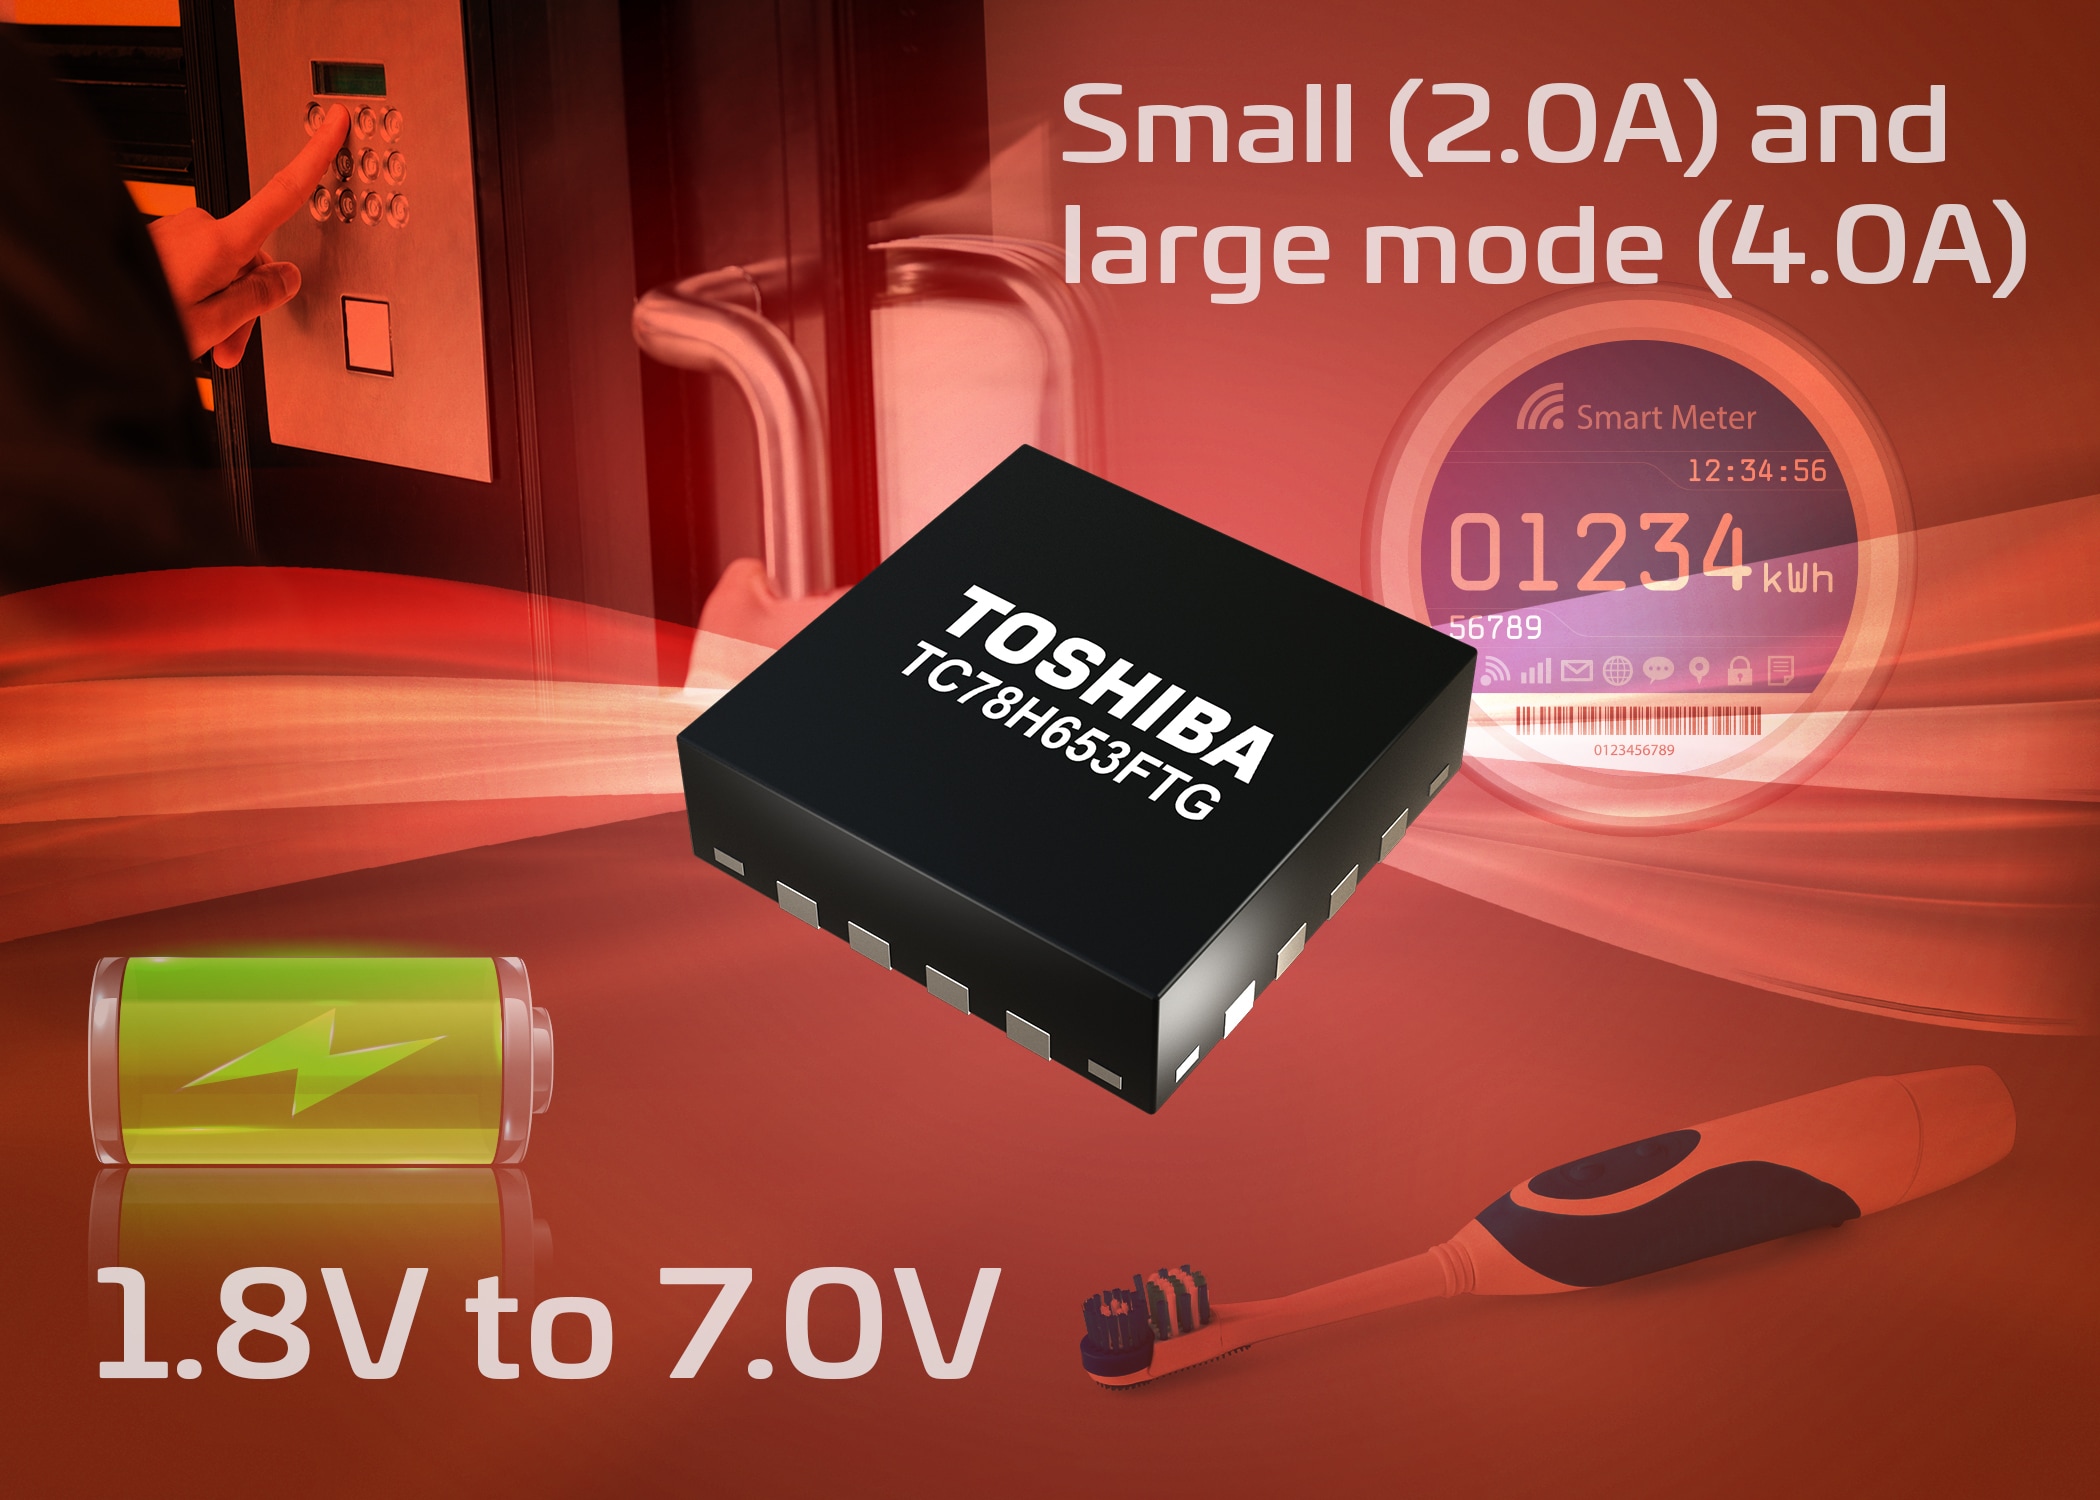 Toshiba launches H-bridge driver IC supporting low-voltage, large current drive 